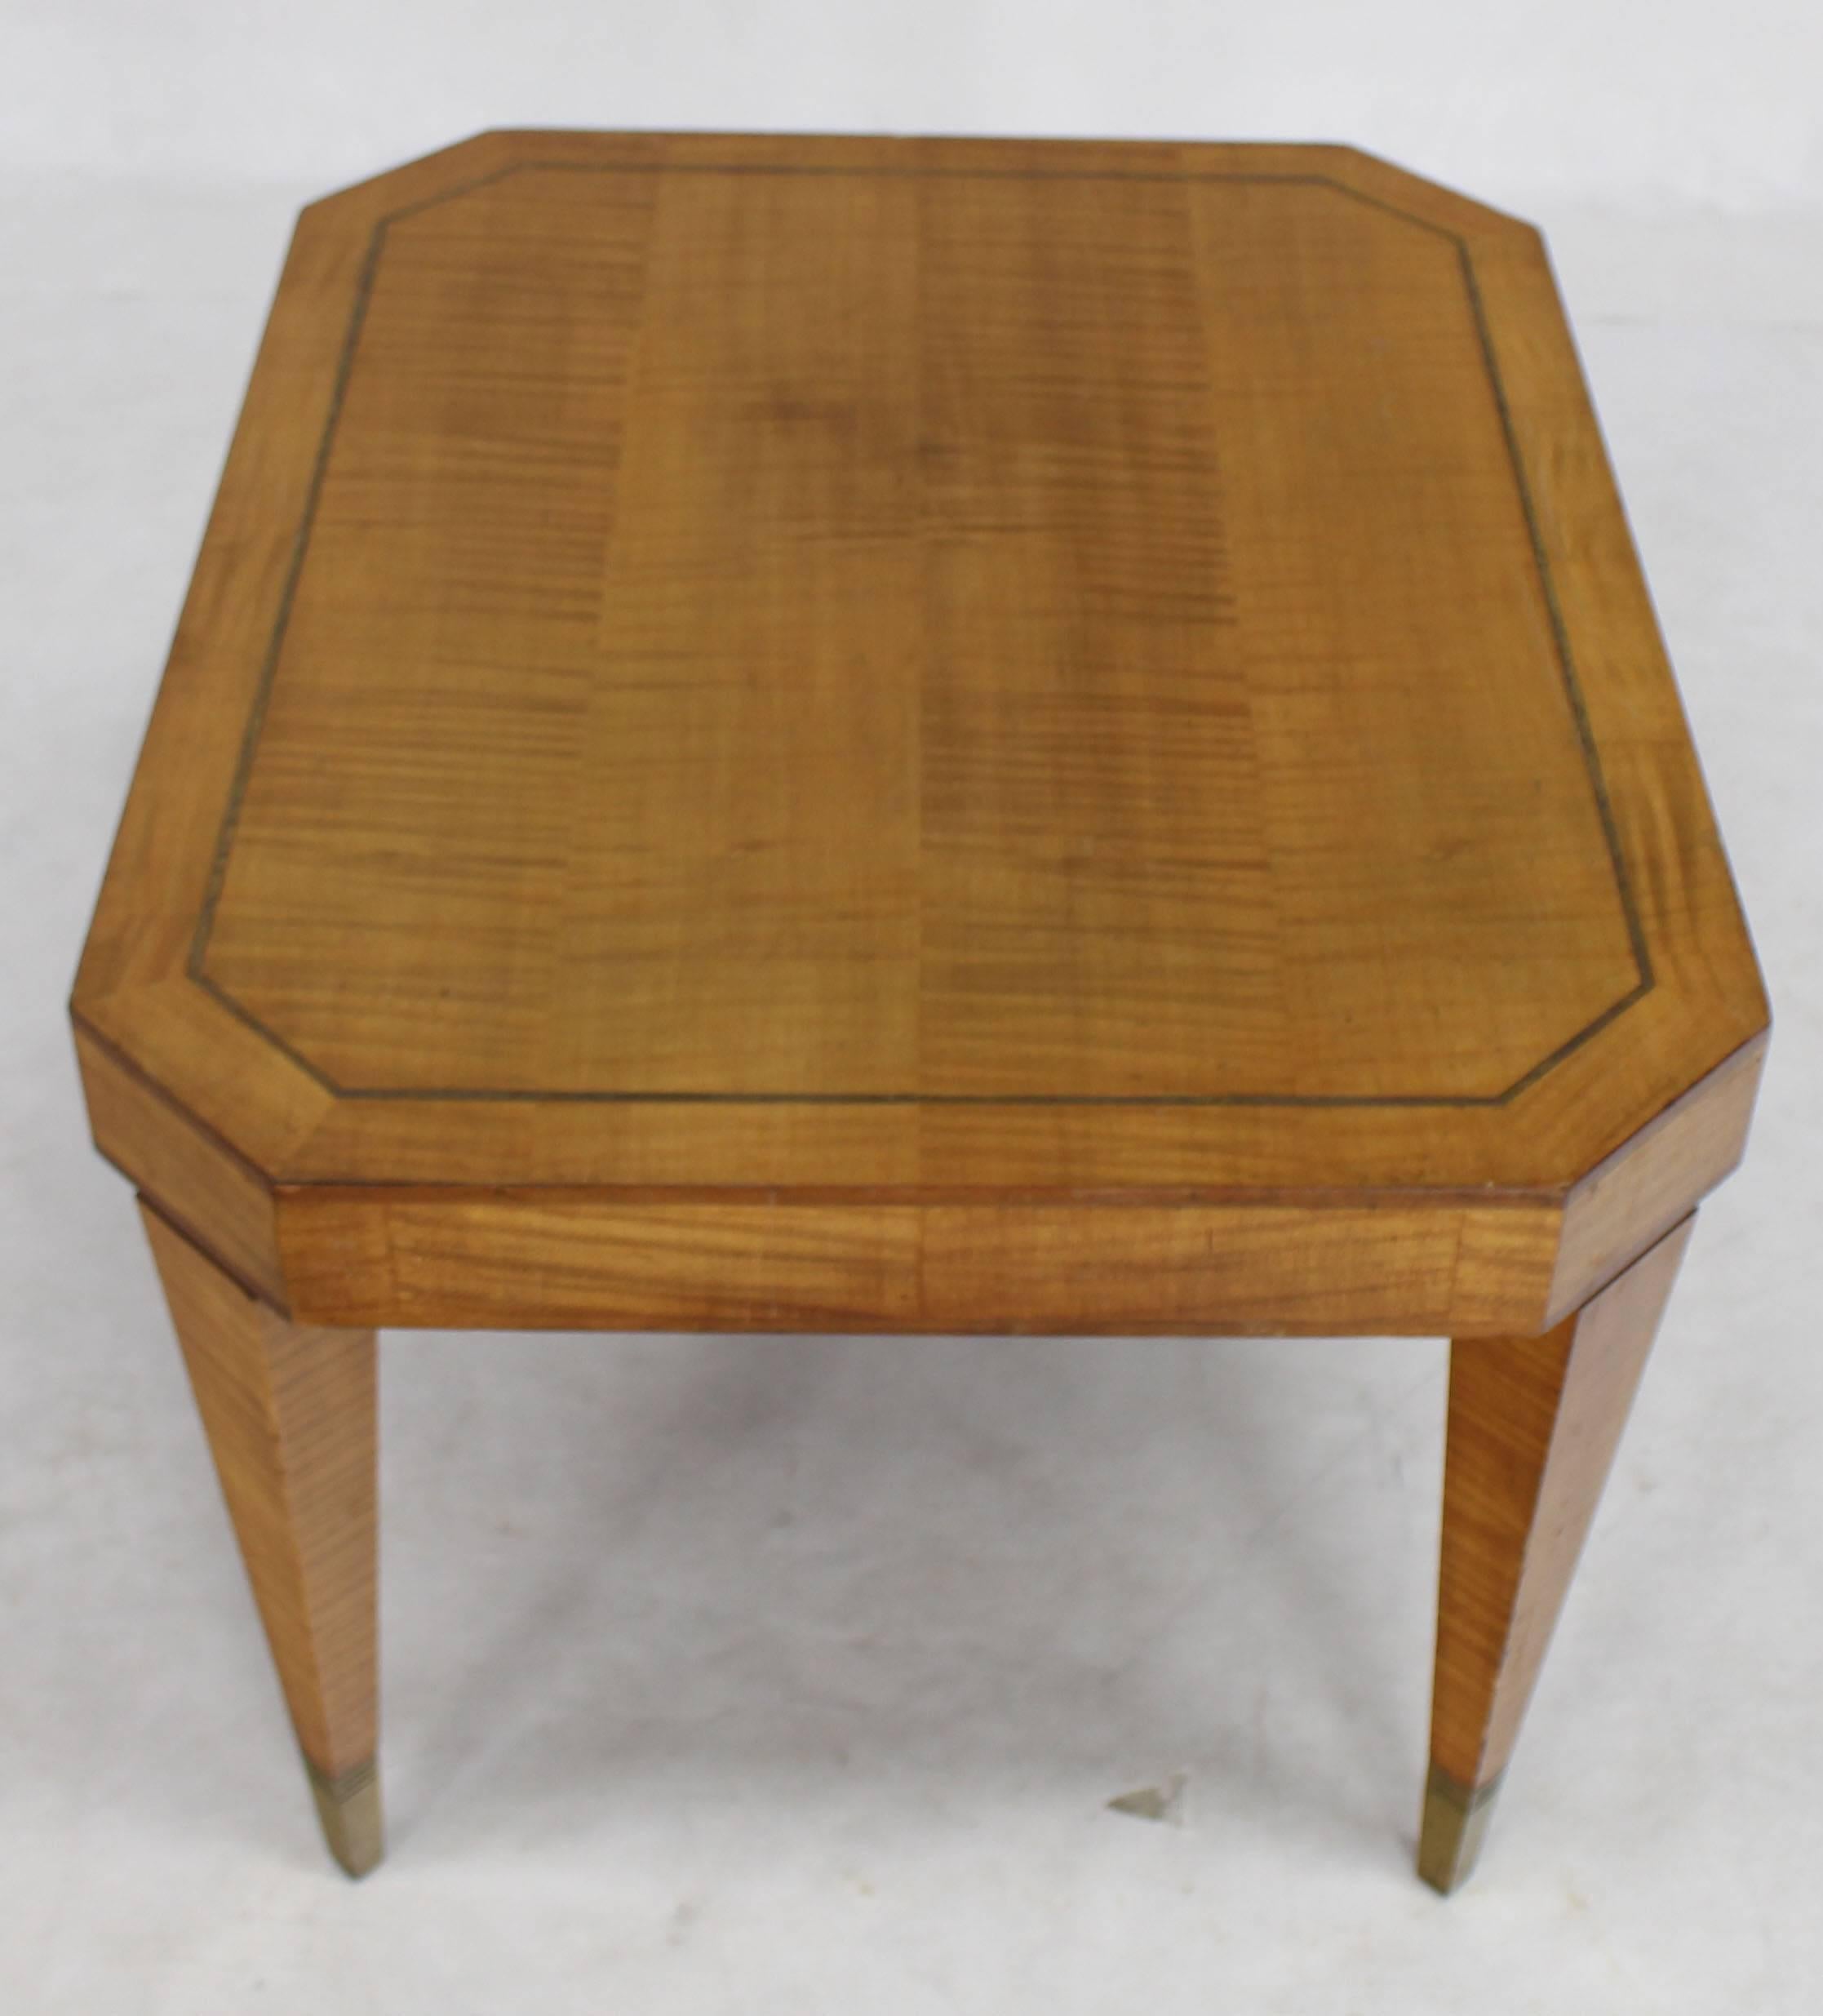 Early midcentury Art Deco satinwood and brass small occasional table by Tommy Parzinger.